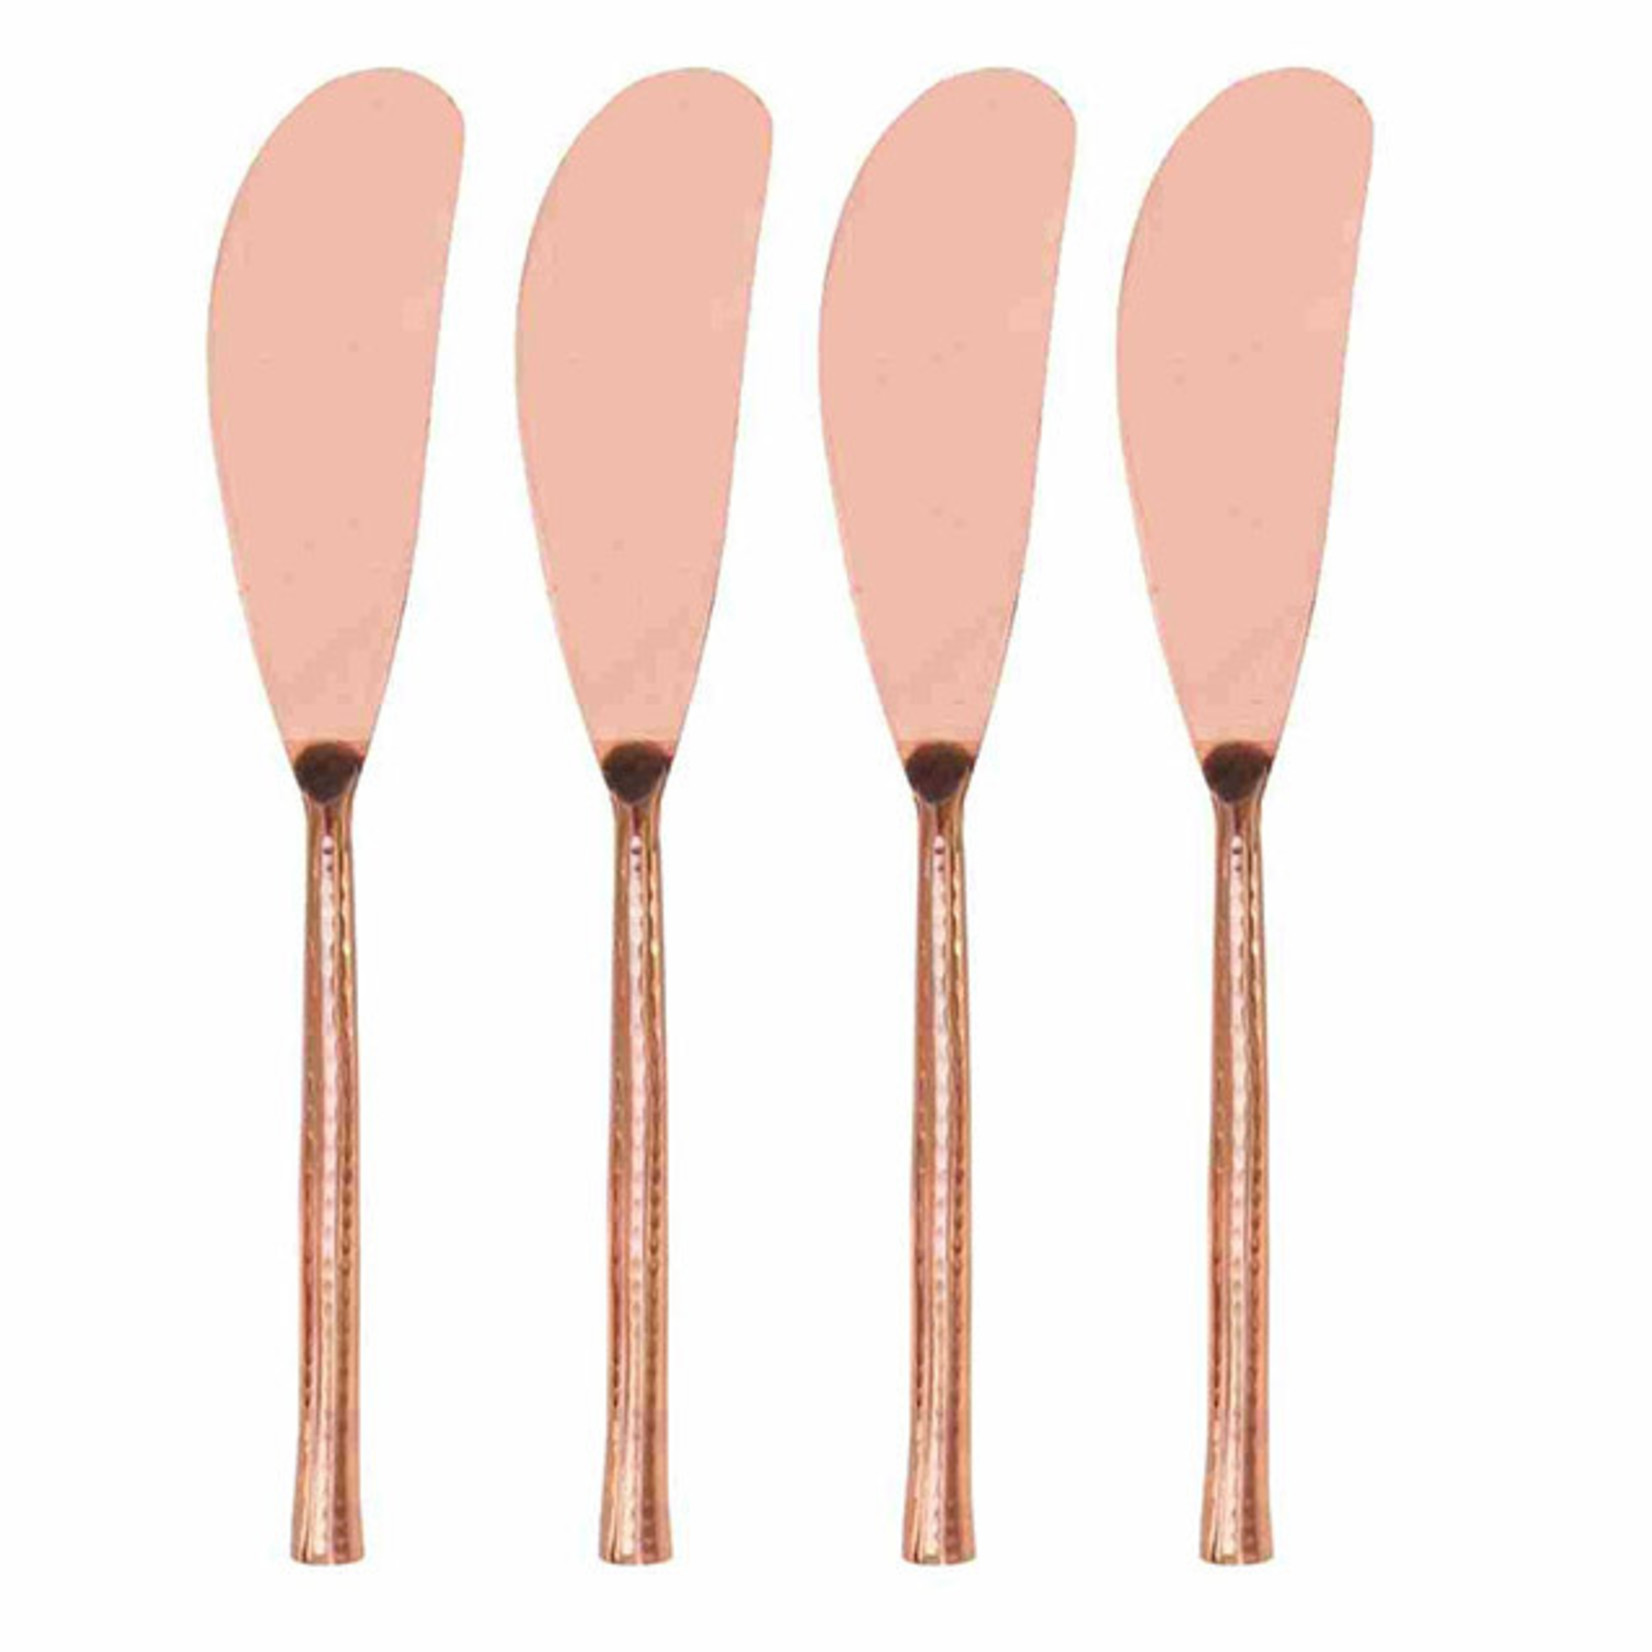 Cheese Set - Hammered copper spreaders st/4